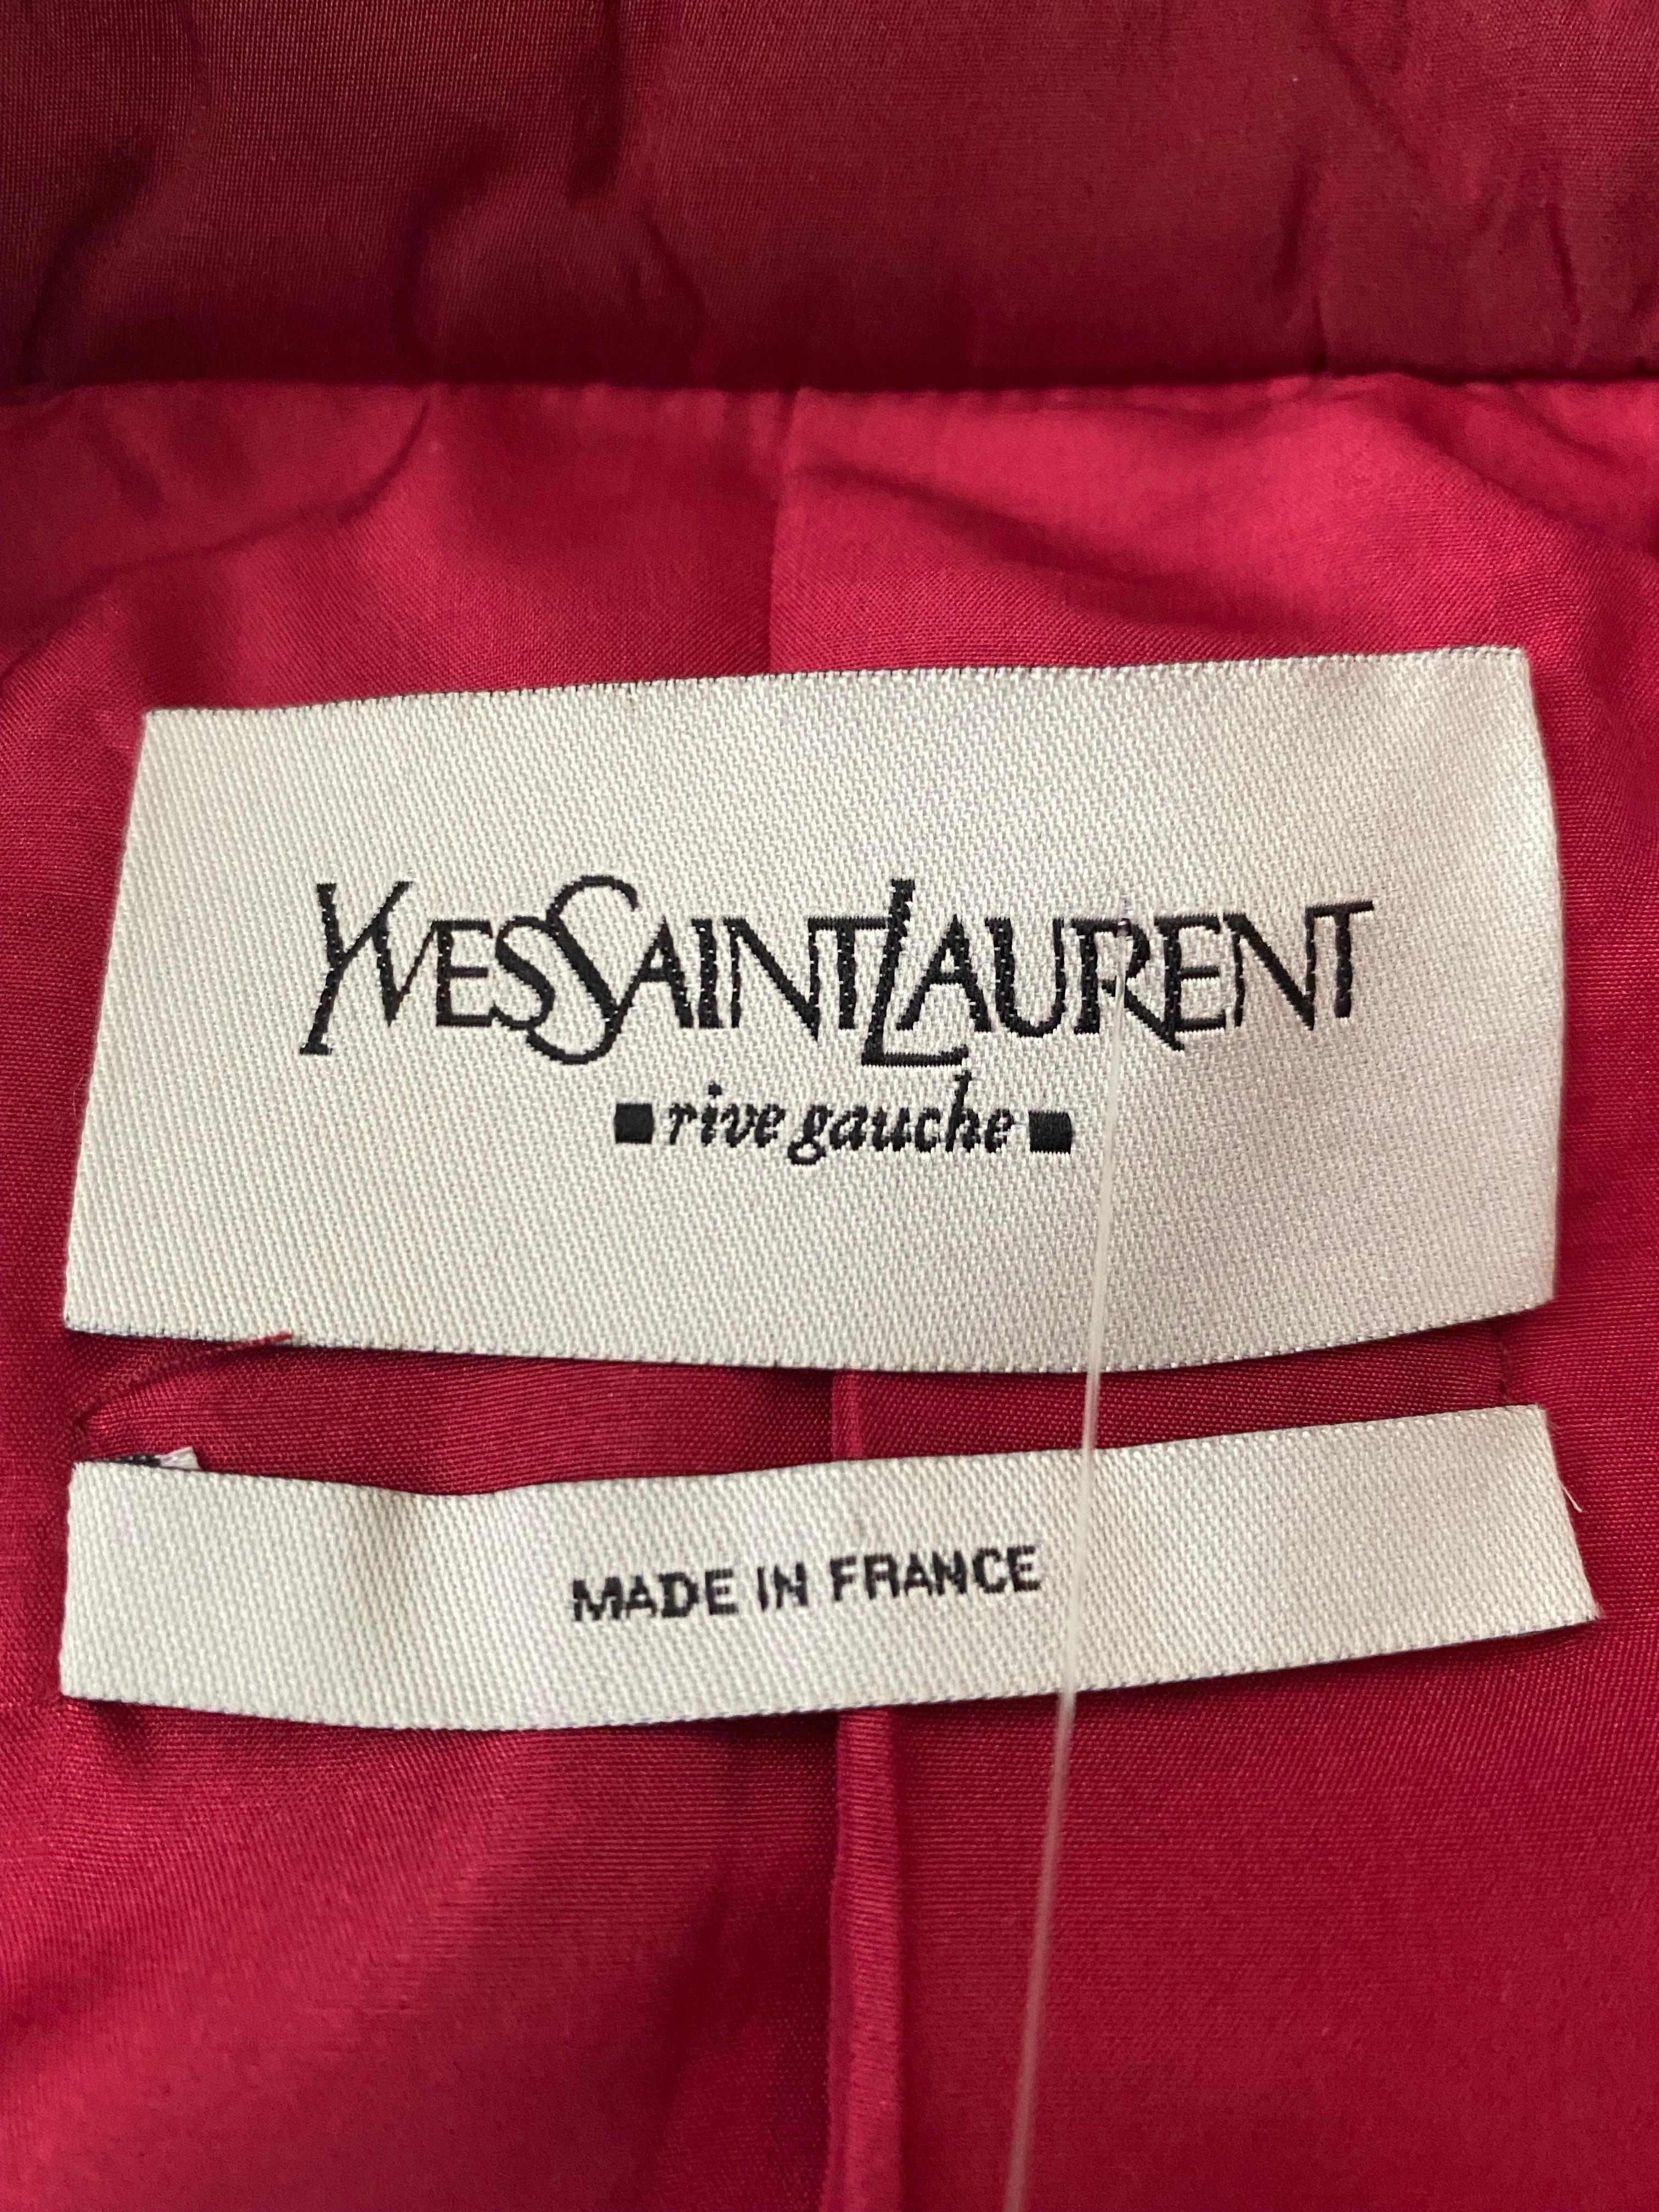 Red F/W 2004 Look #1 Vintage Tom Ford for Yves Saint Laurent Silk Skirt Suit 38 - 6 For Sale